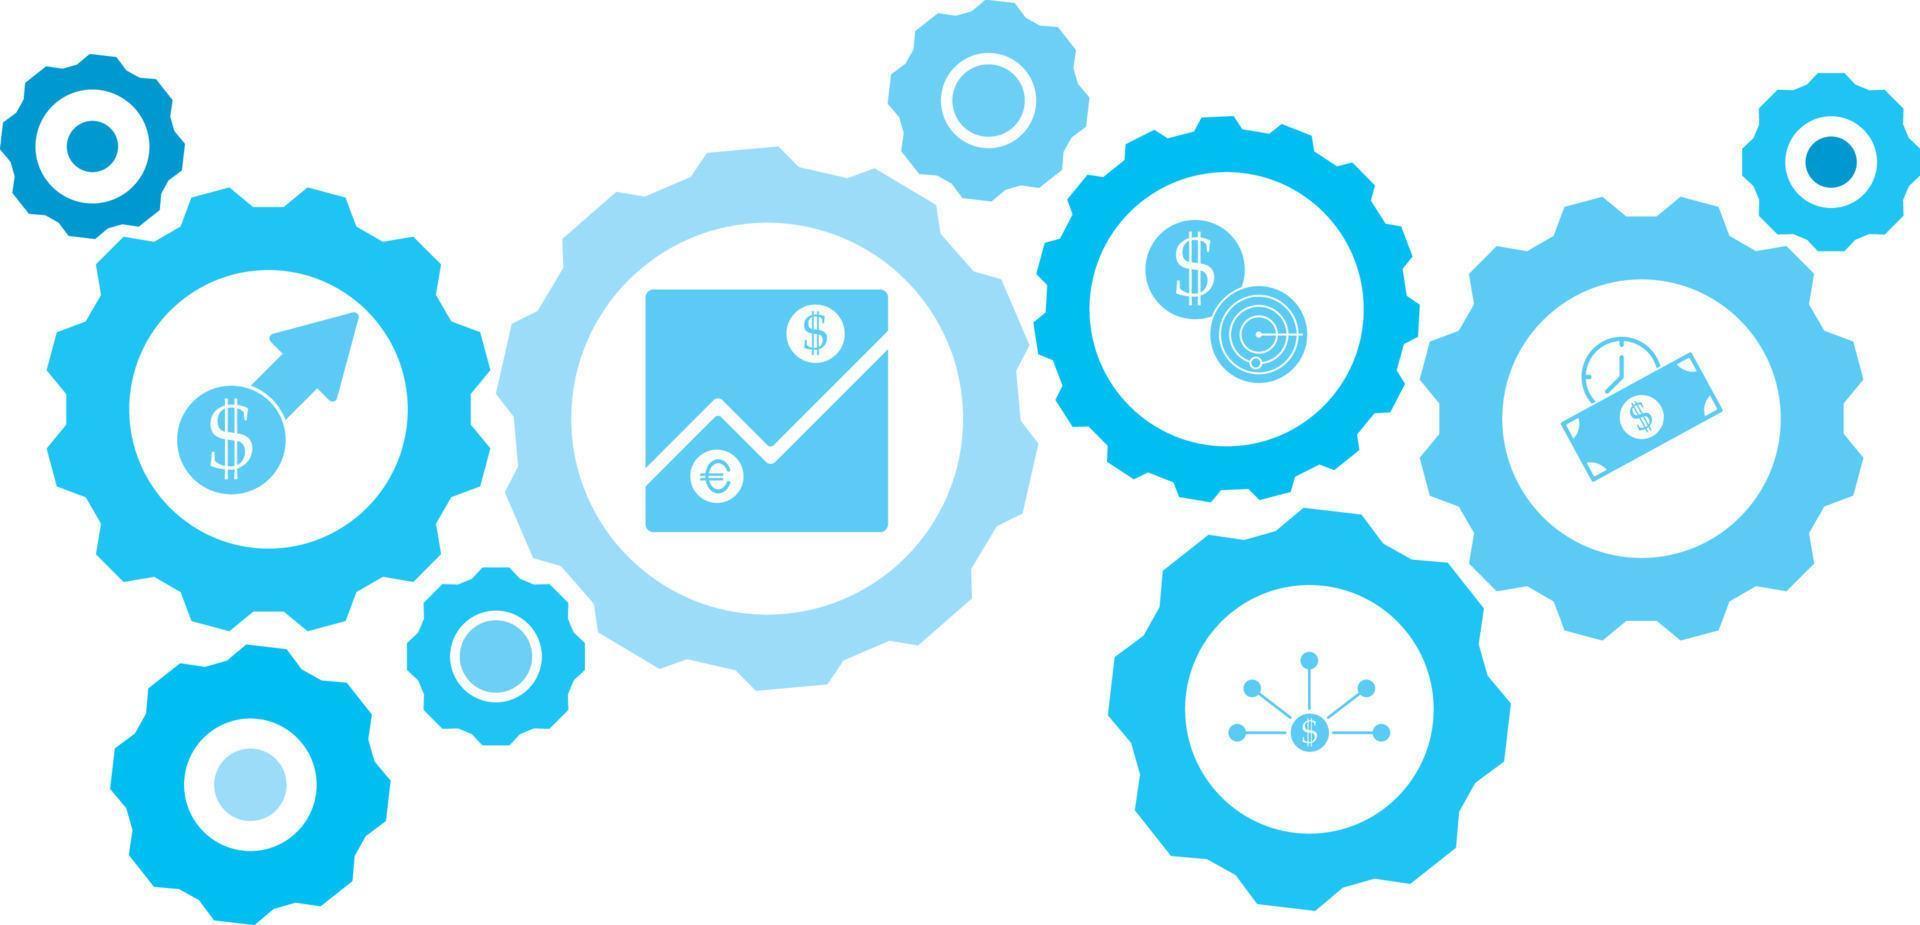 Connected gears and vector icons for logistic, service, shipping, distribution, transport, market, communicate concepts. gear blue icon setbusiness project, commercial .